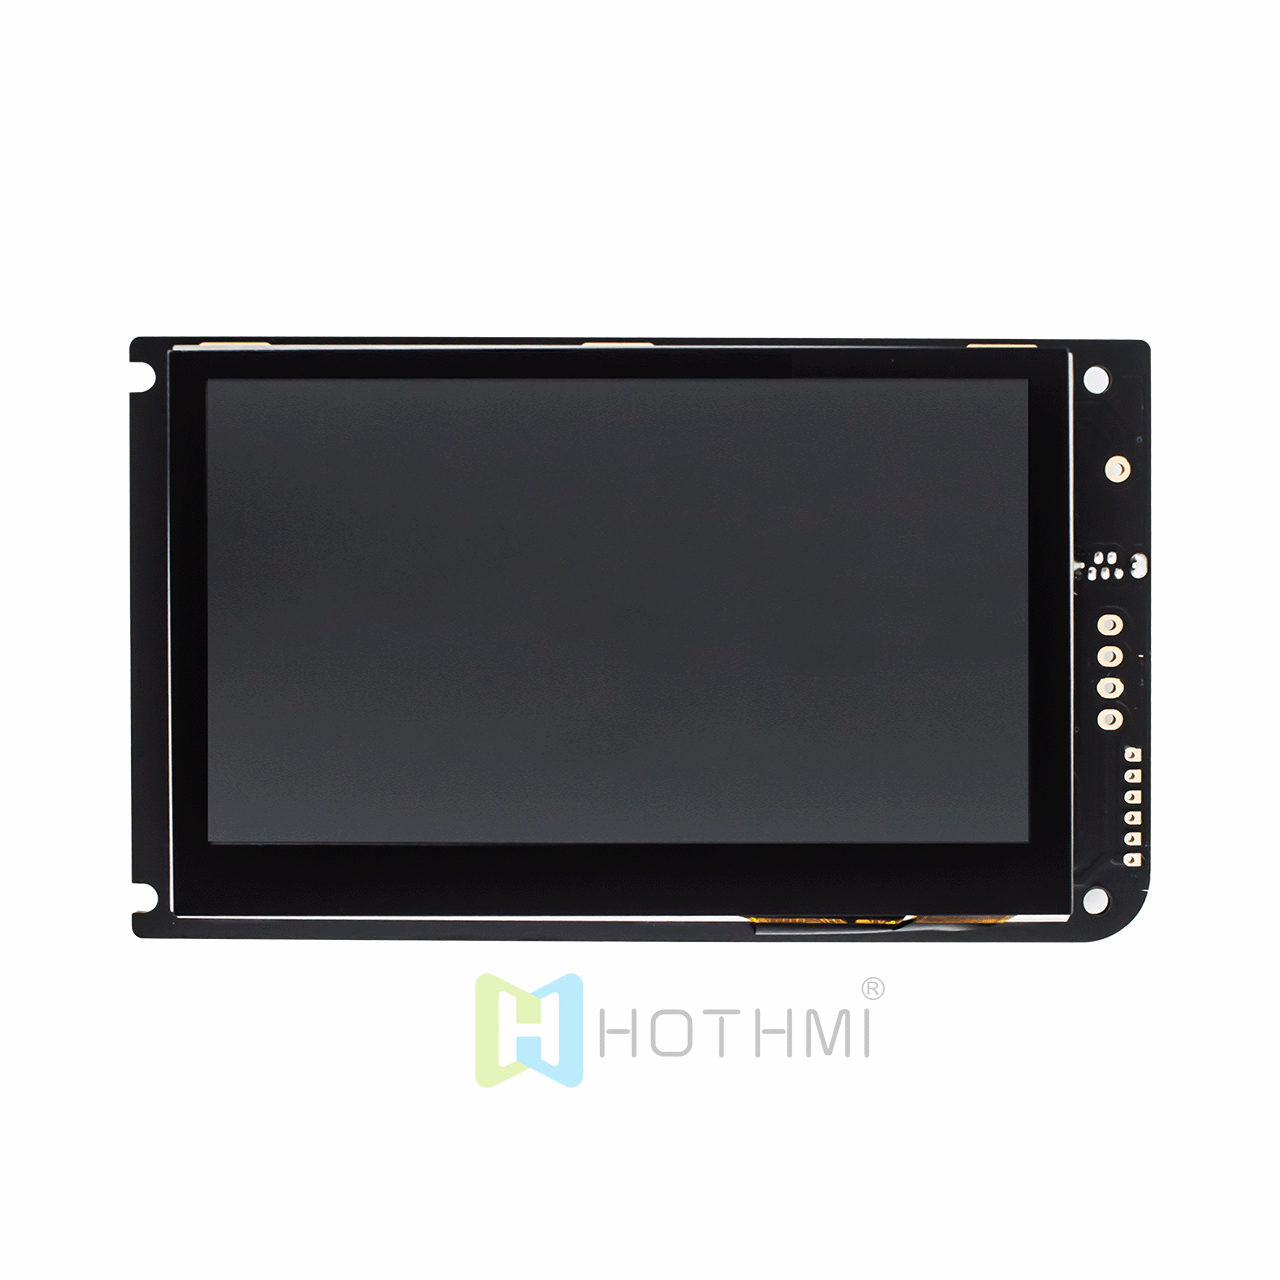 4.3-inch 480x272 dot matrix smart serial screen TFT LCD display module URAT capacitive touch screen HMI IPS sunlight readable compatible with Raspberry Pi